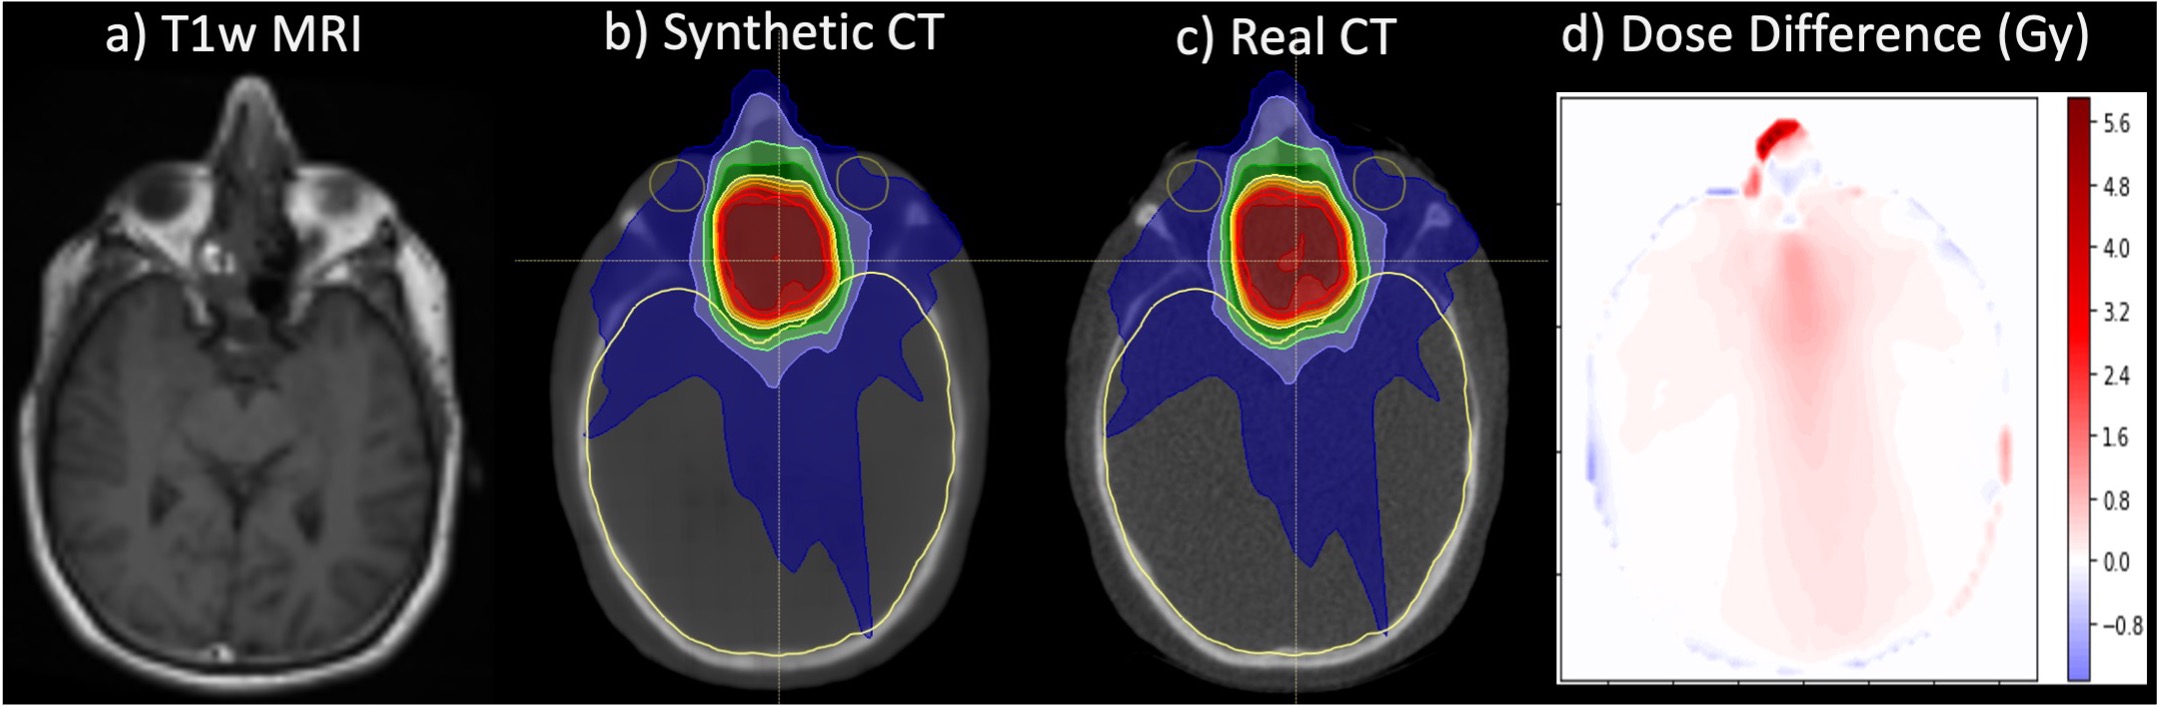 Synthesizing CT from MRI in Radiation Oncology